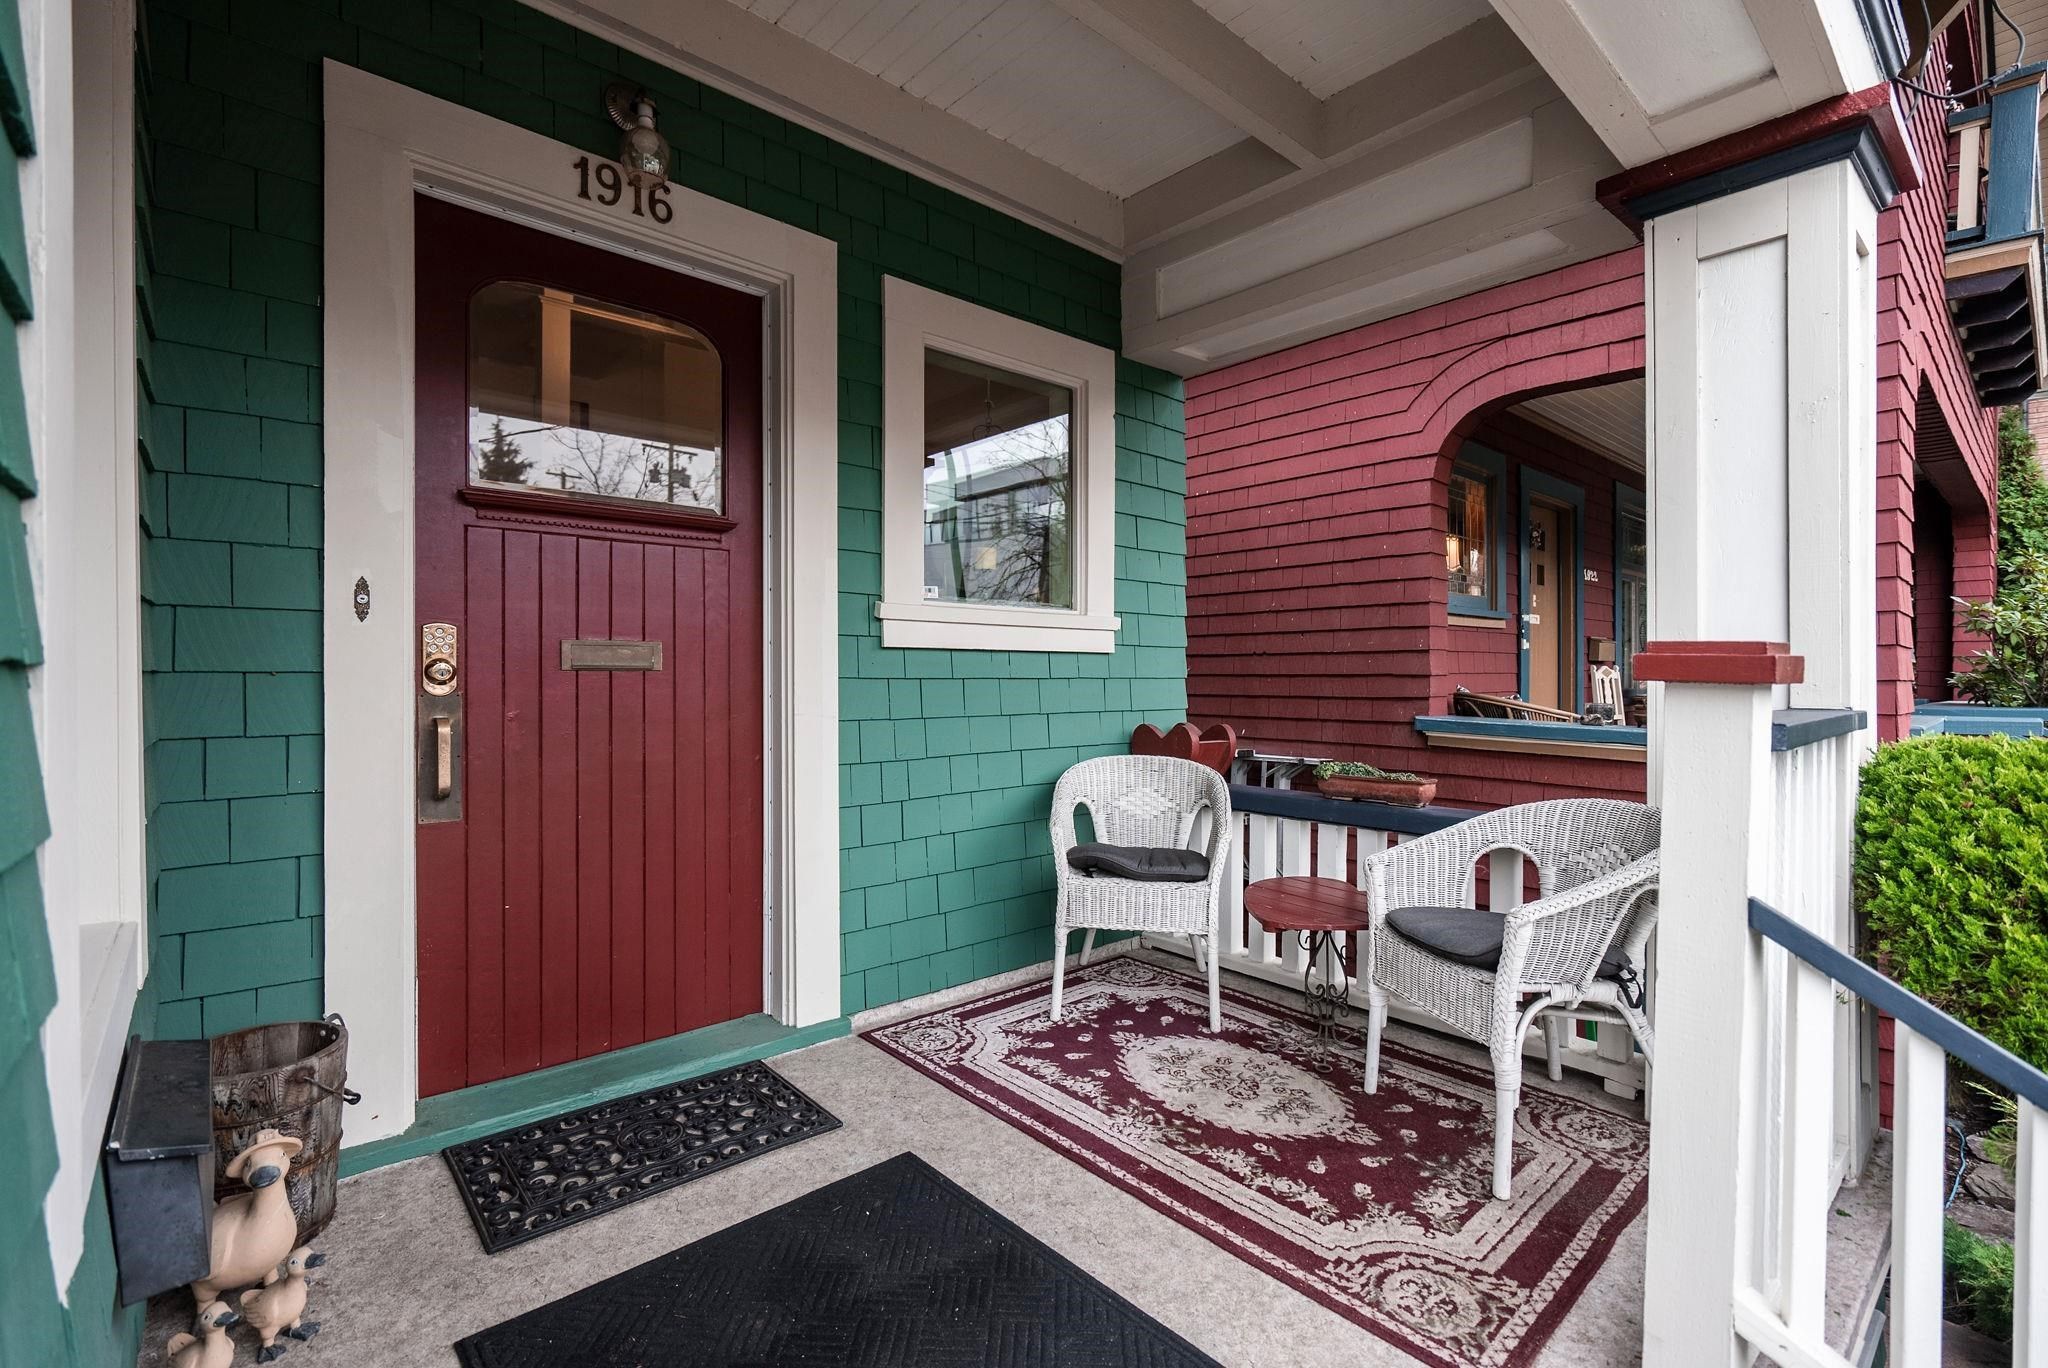 Main Photo: 1916 ARBUTUS STREET in Vancouver: Kitsilano House for sale (Vancouver West)  : MLS®# R2641716